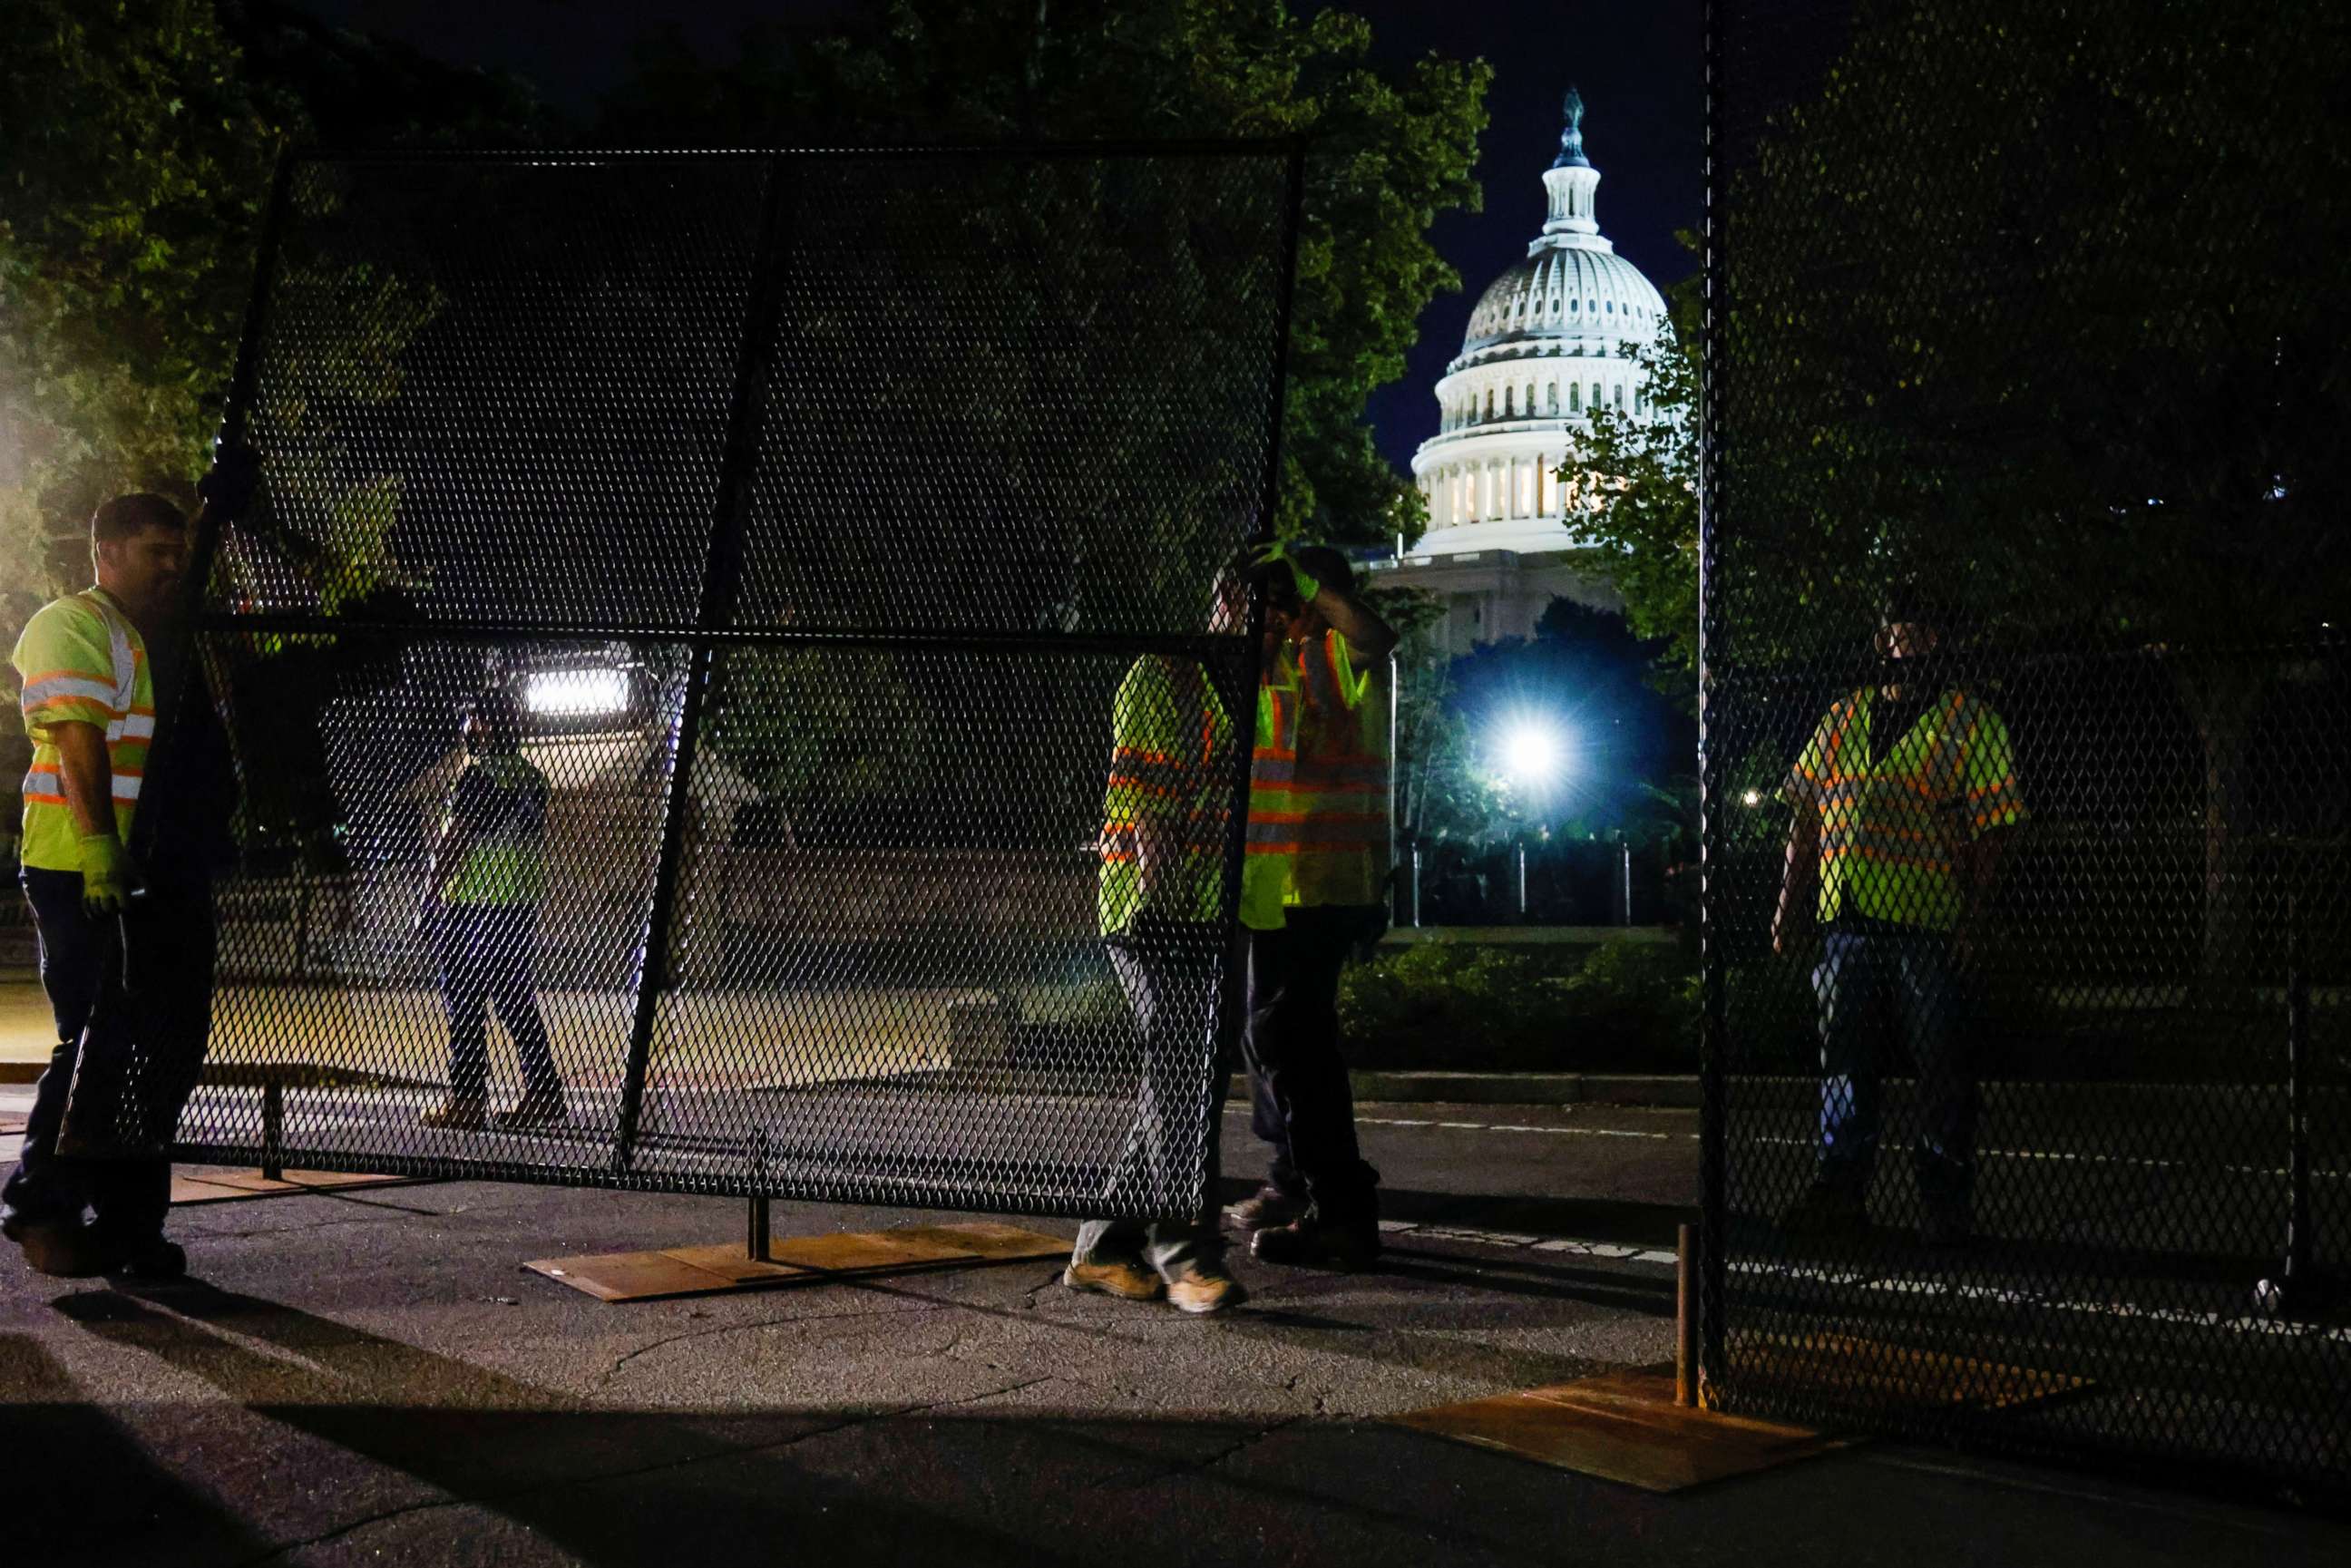 PHOTO: Workers install a security fence around the U.S. Capitol on Sept. 15, 2021, ahead of an expected rally on Saturday in support of the Jan. 6 defendants in Washington.